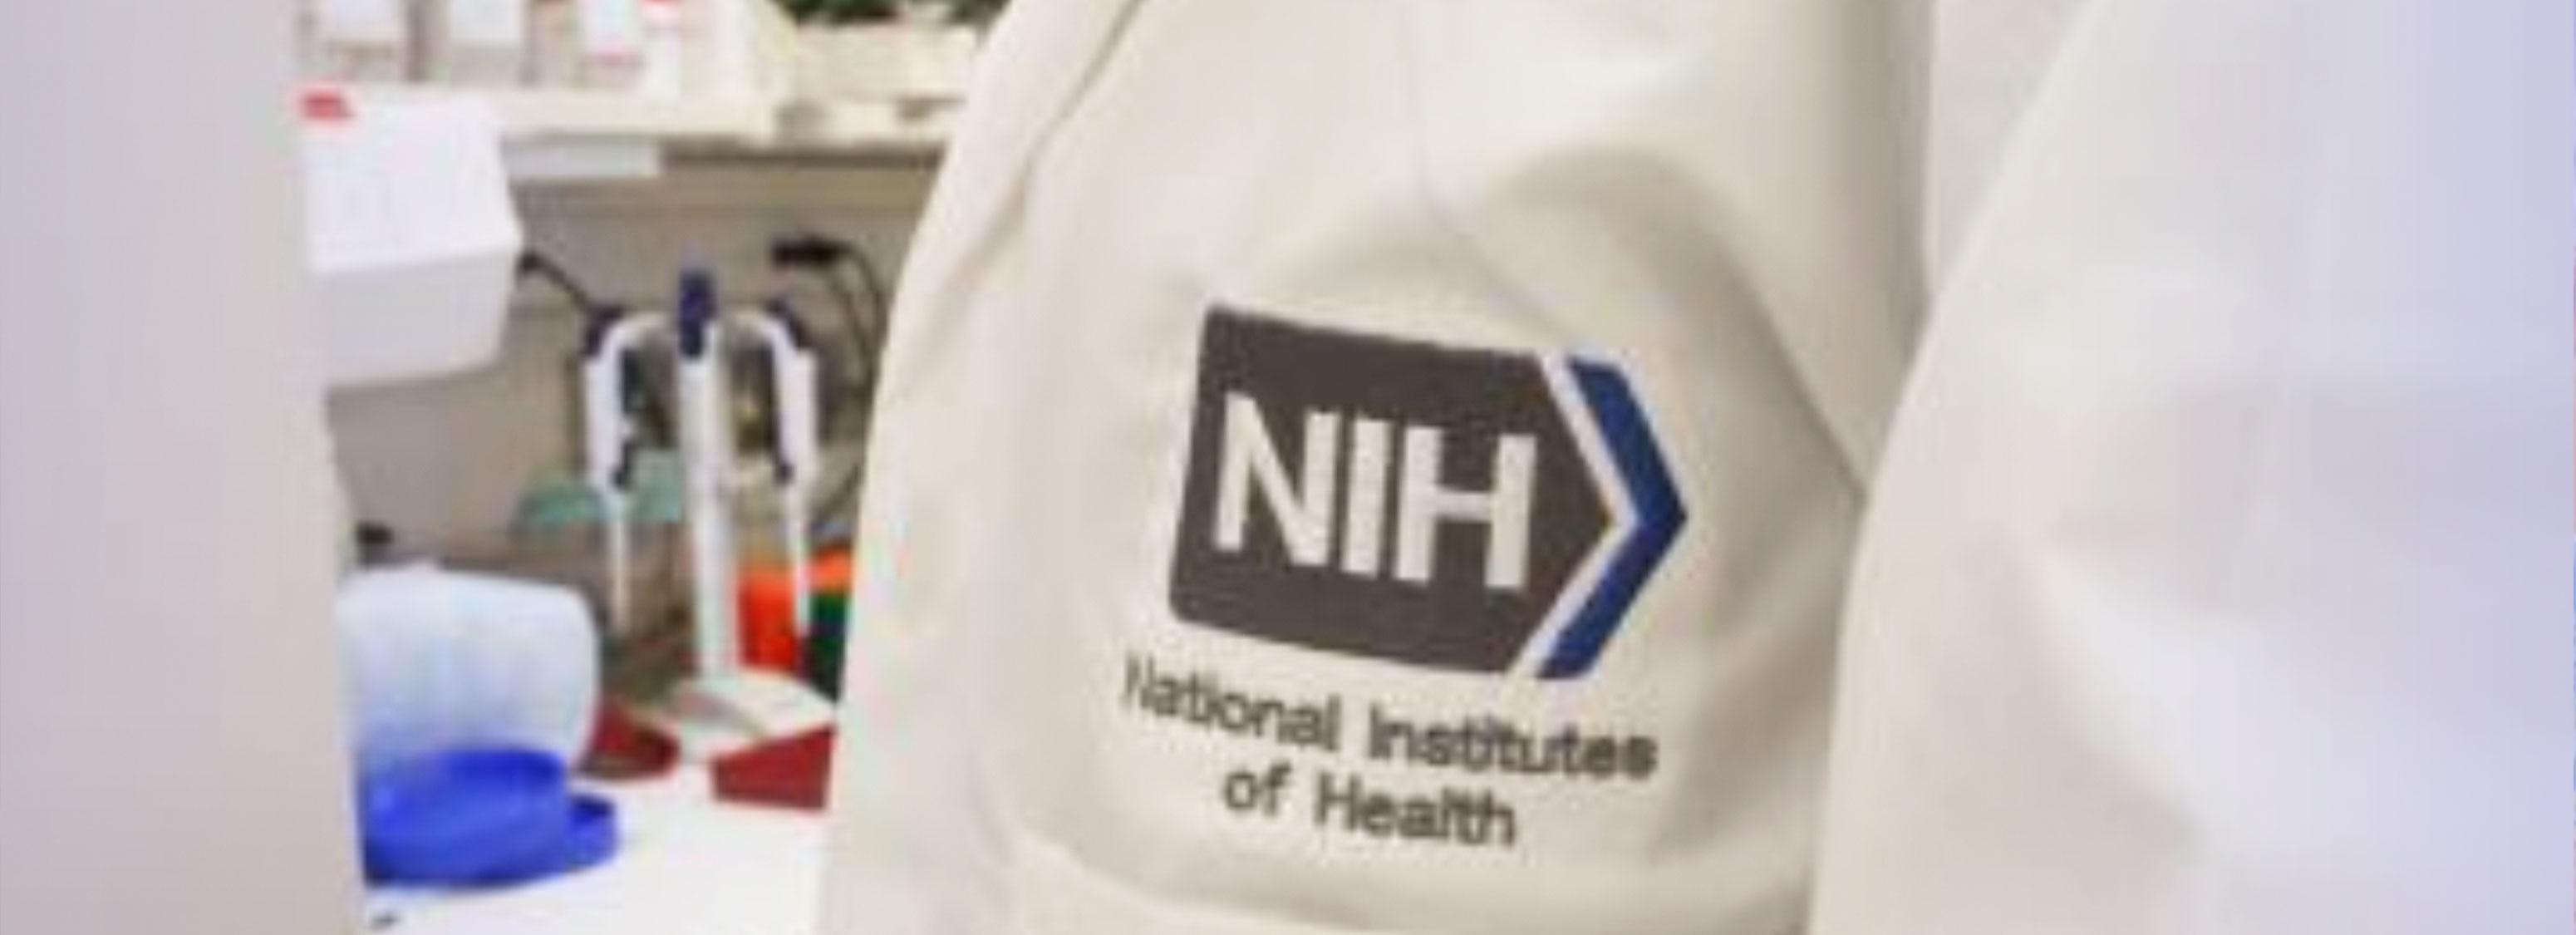 Close-up of labcoat with NIH logo